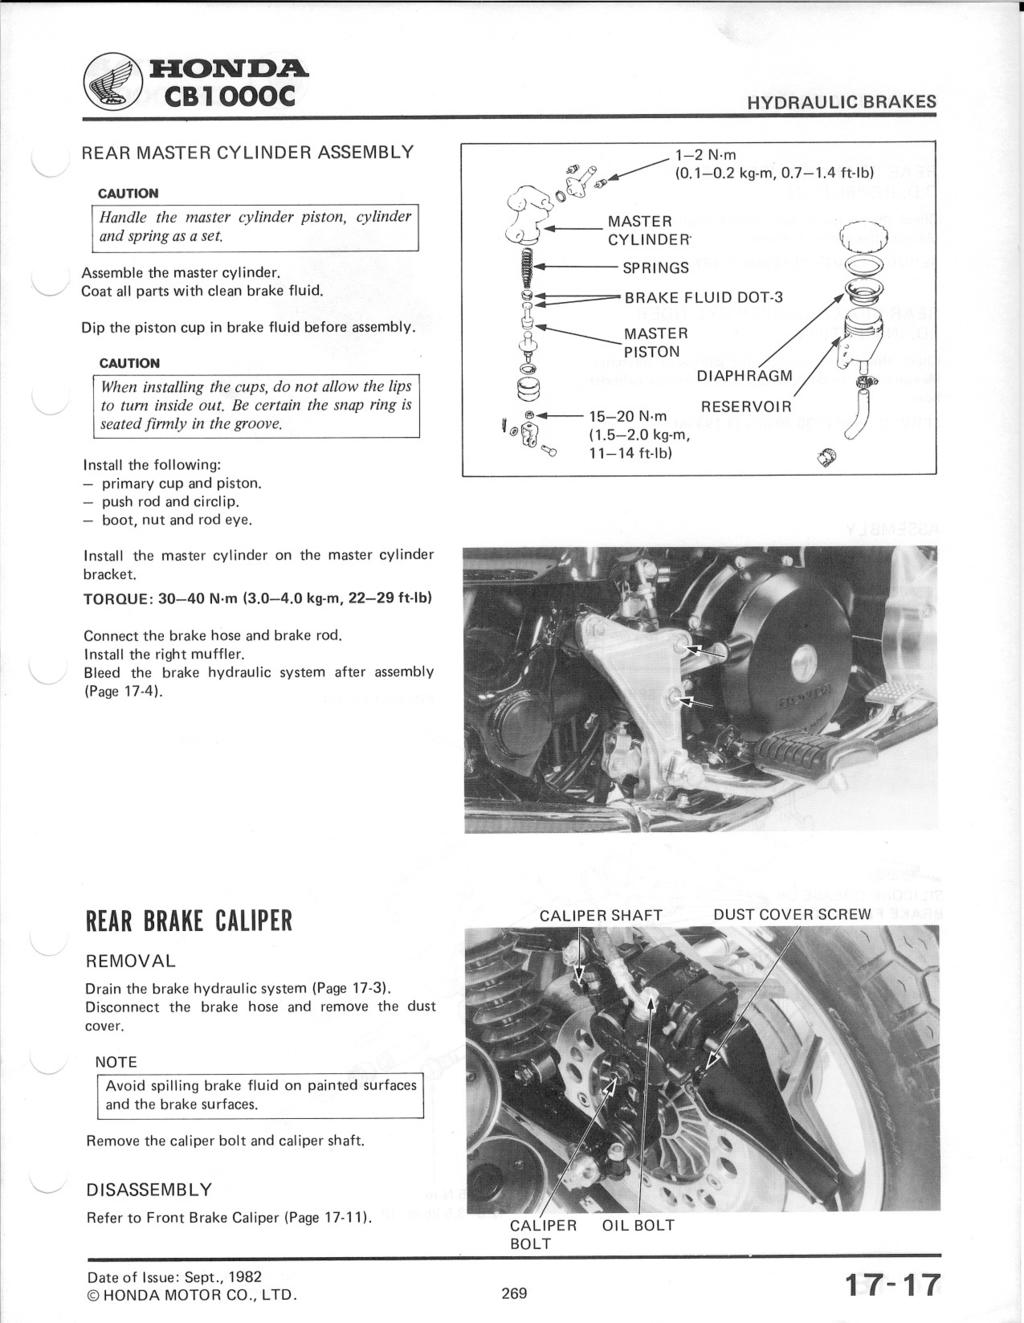 ~:H:OlVD.A. REAR MASTER CYLINDER ASSEMBLY CAUTION Handle the master cylinder piston, cylinder and spring as a set. Assemble the master cyl inder..~ Coat all parts with clean brake fluid.